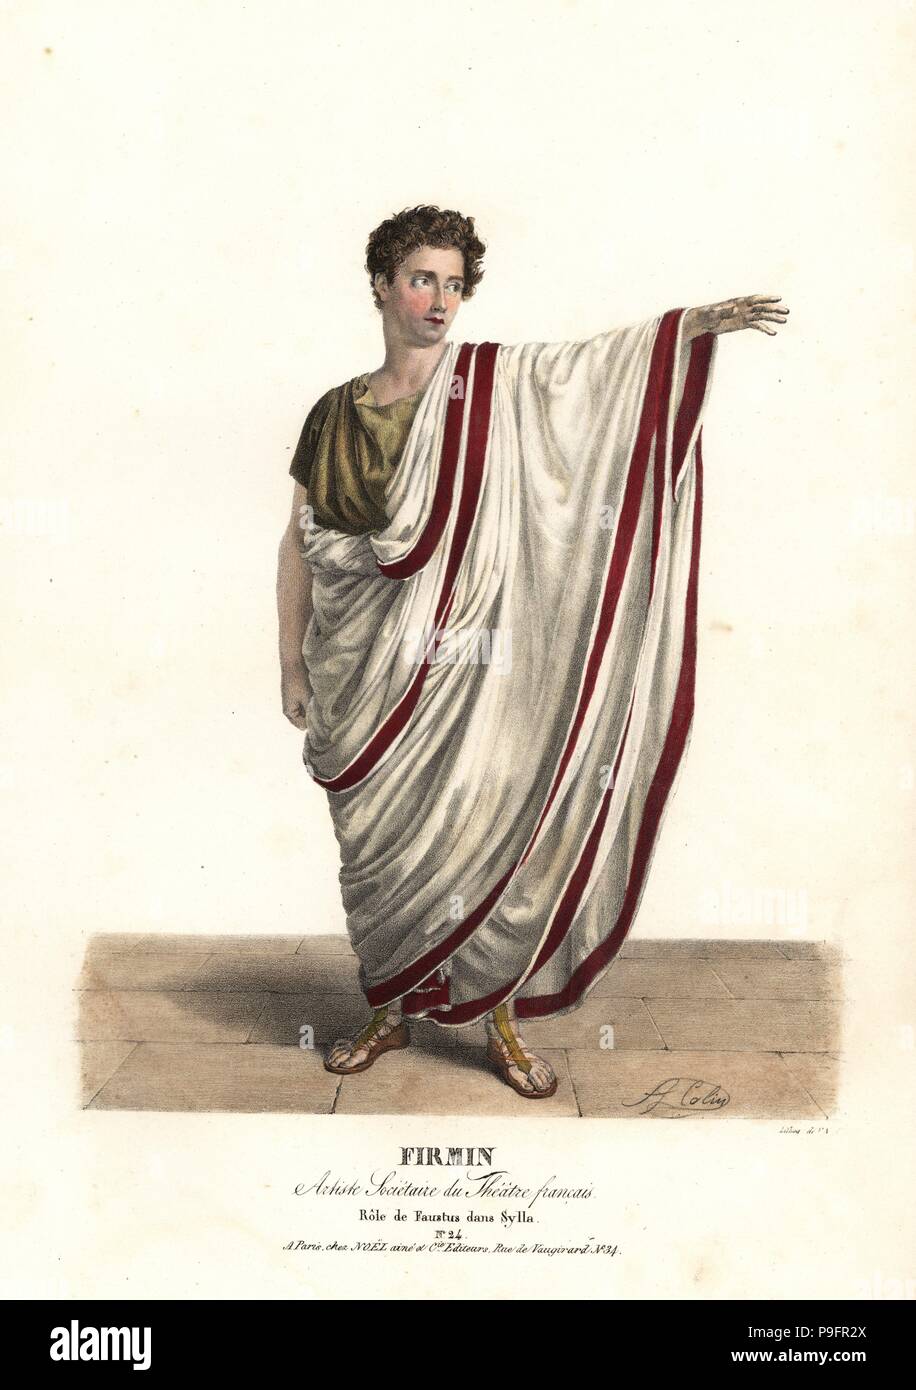 Jean-Baptiste Firmin as Faustus in the tragedy Sylla by Victor Joseph Etienne de Jouy, Theatre Francais, 1826. Handcoloured lithograph by F. Noel after an illustration by Alexandre-Marie Colin from Portraits d'Acteurs et d'Actrices dans different roles, F. Noel, Paris, 1826. Stock Photo